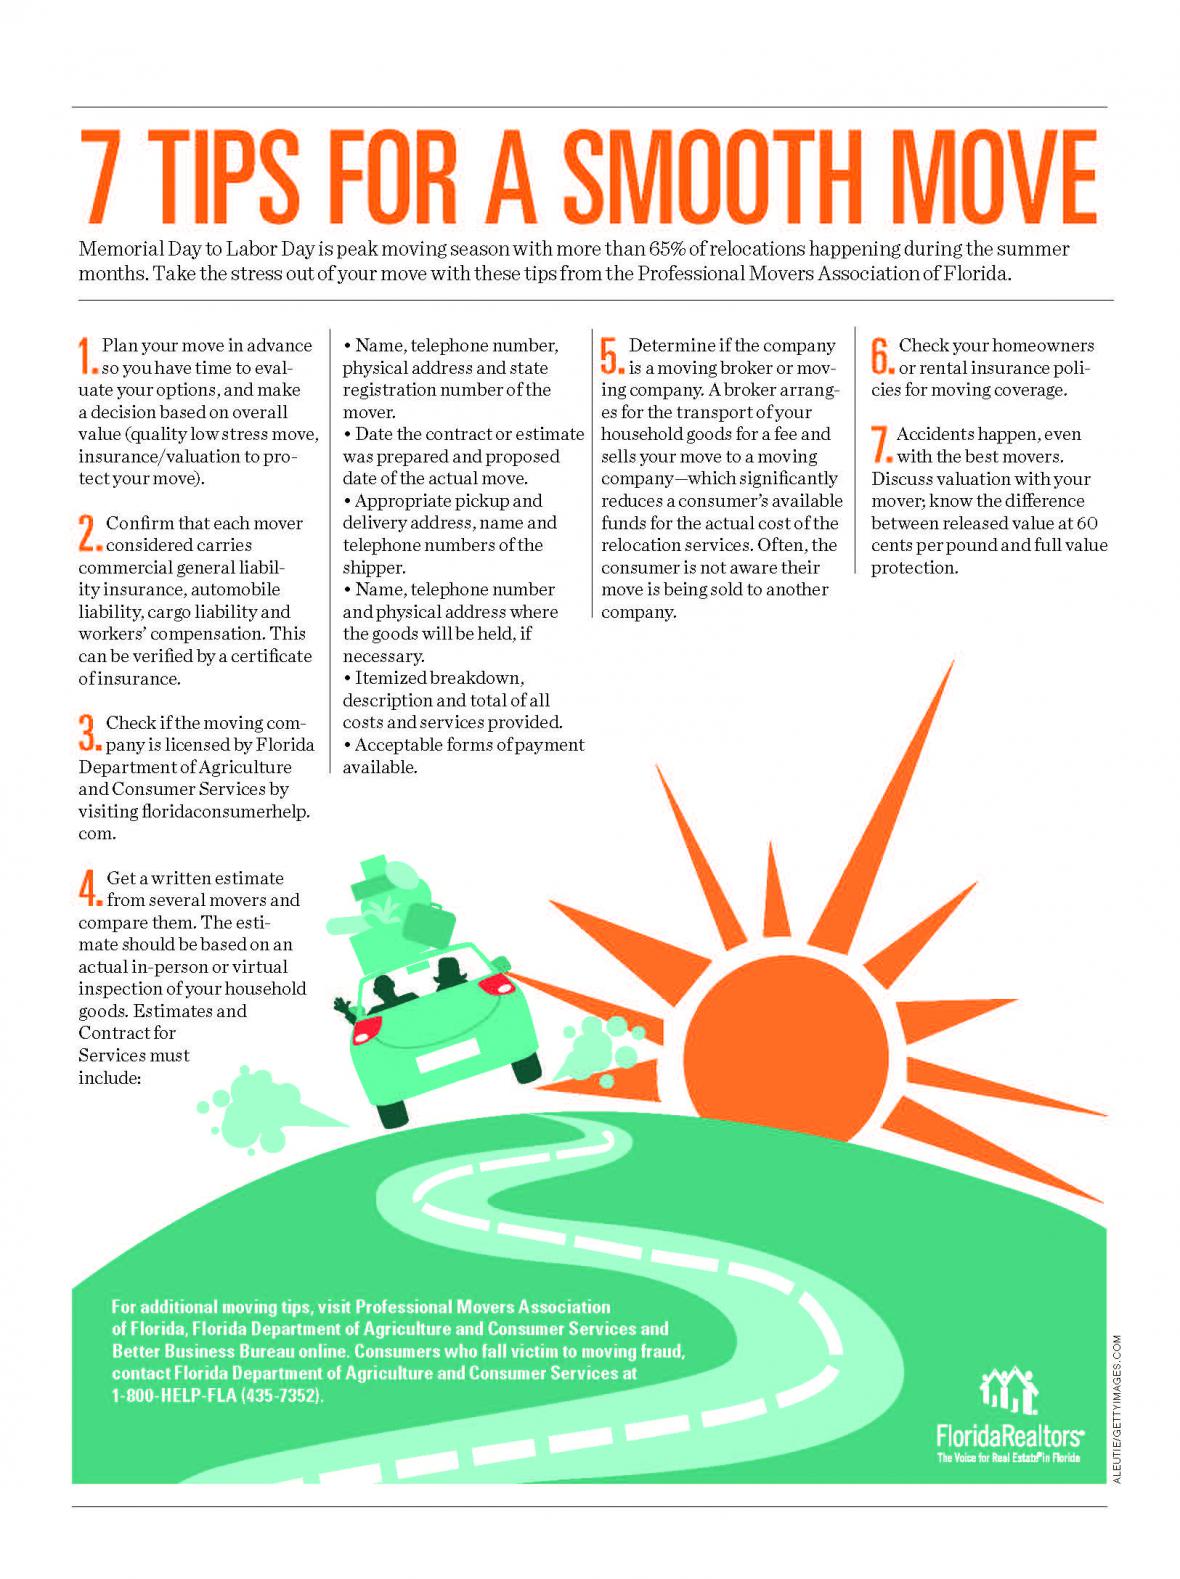 7 tips for a smooth move infographic